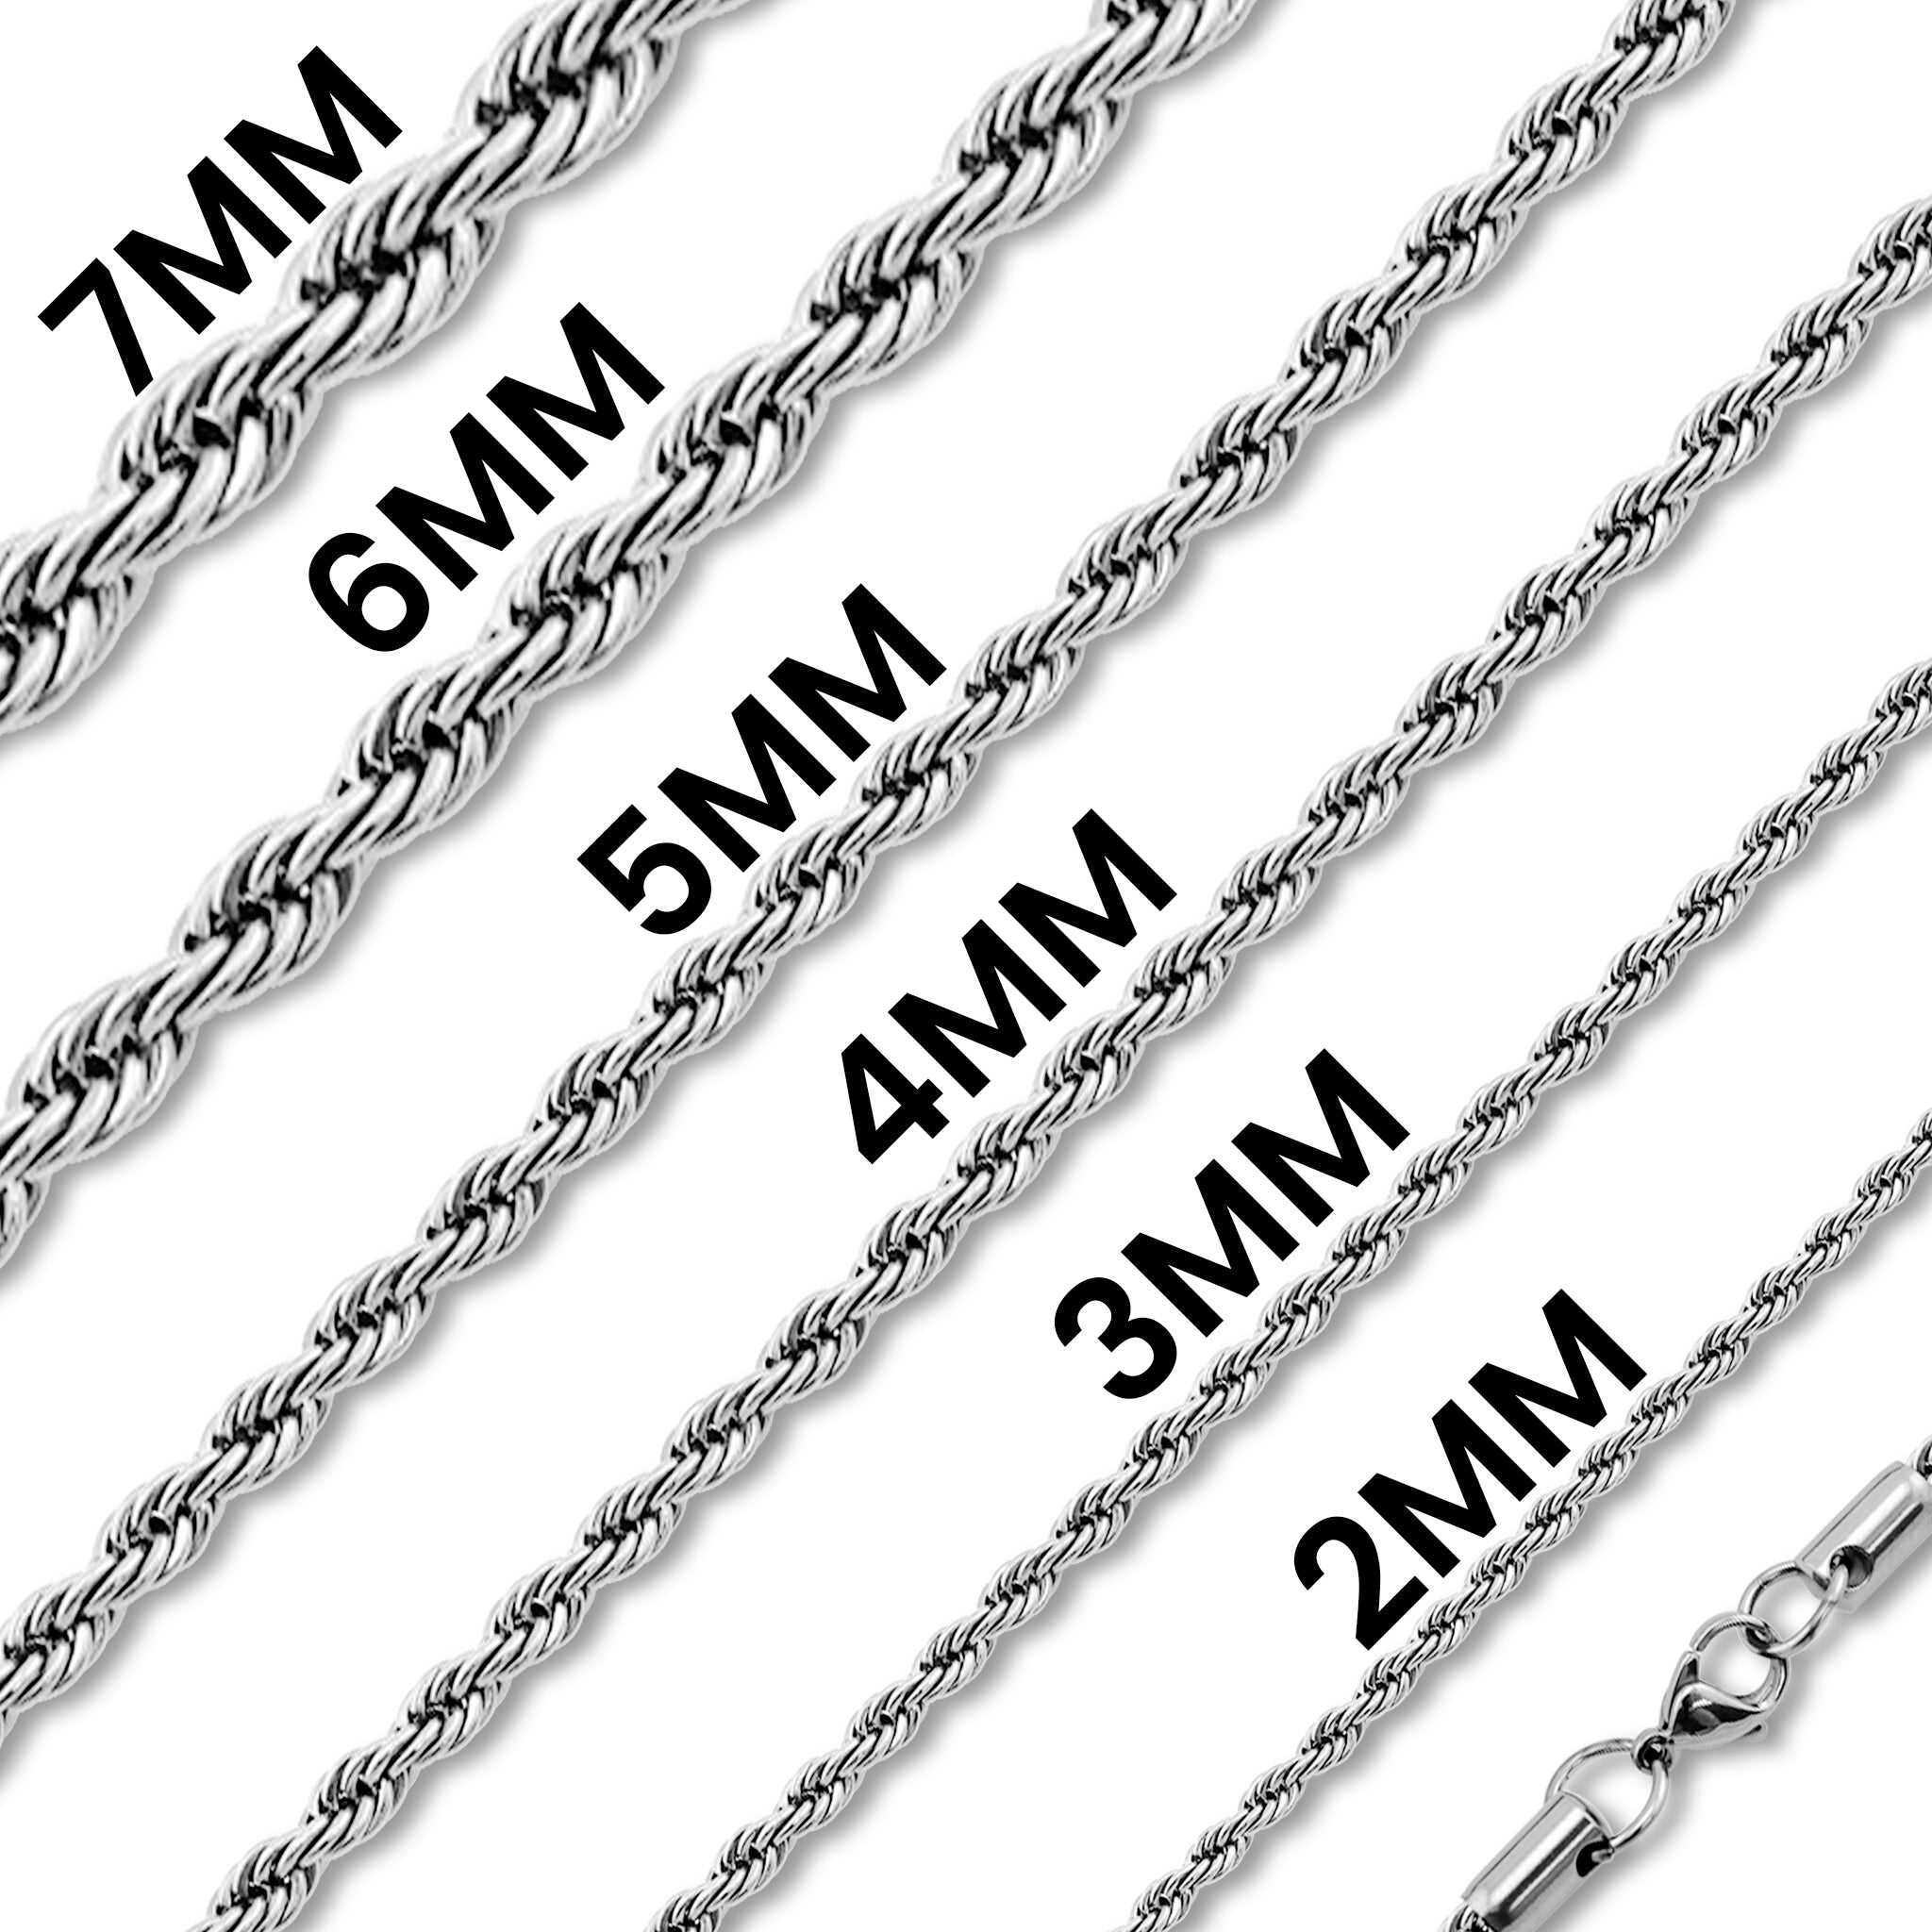 Steel Chain Necklace Men's Necklace Masculine Box Chain Stainless Steel  Chain Waterproof Jewelry Necklace by Modern Out - Etsy